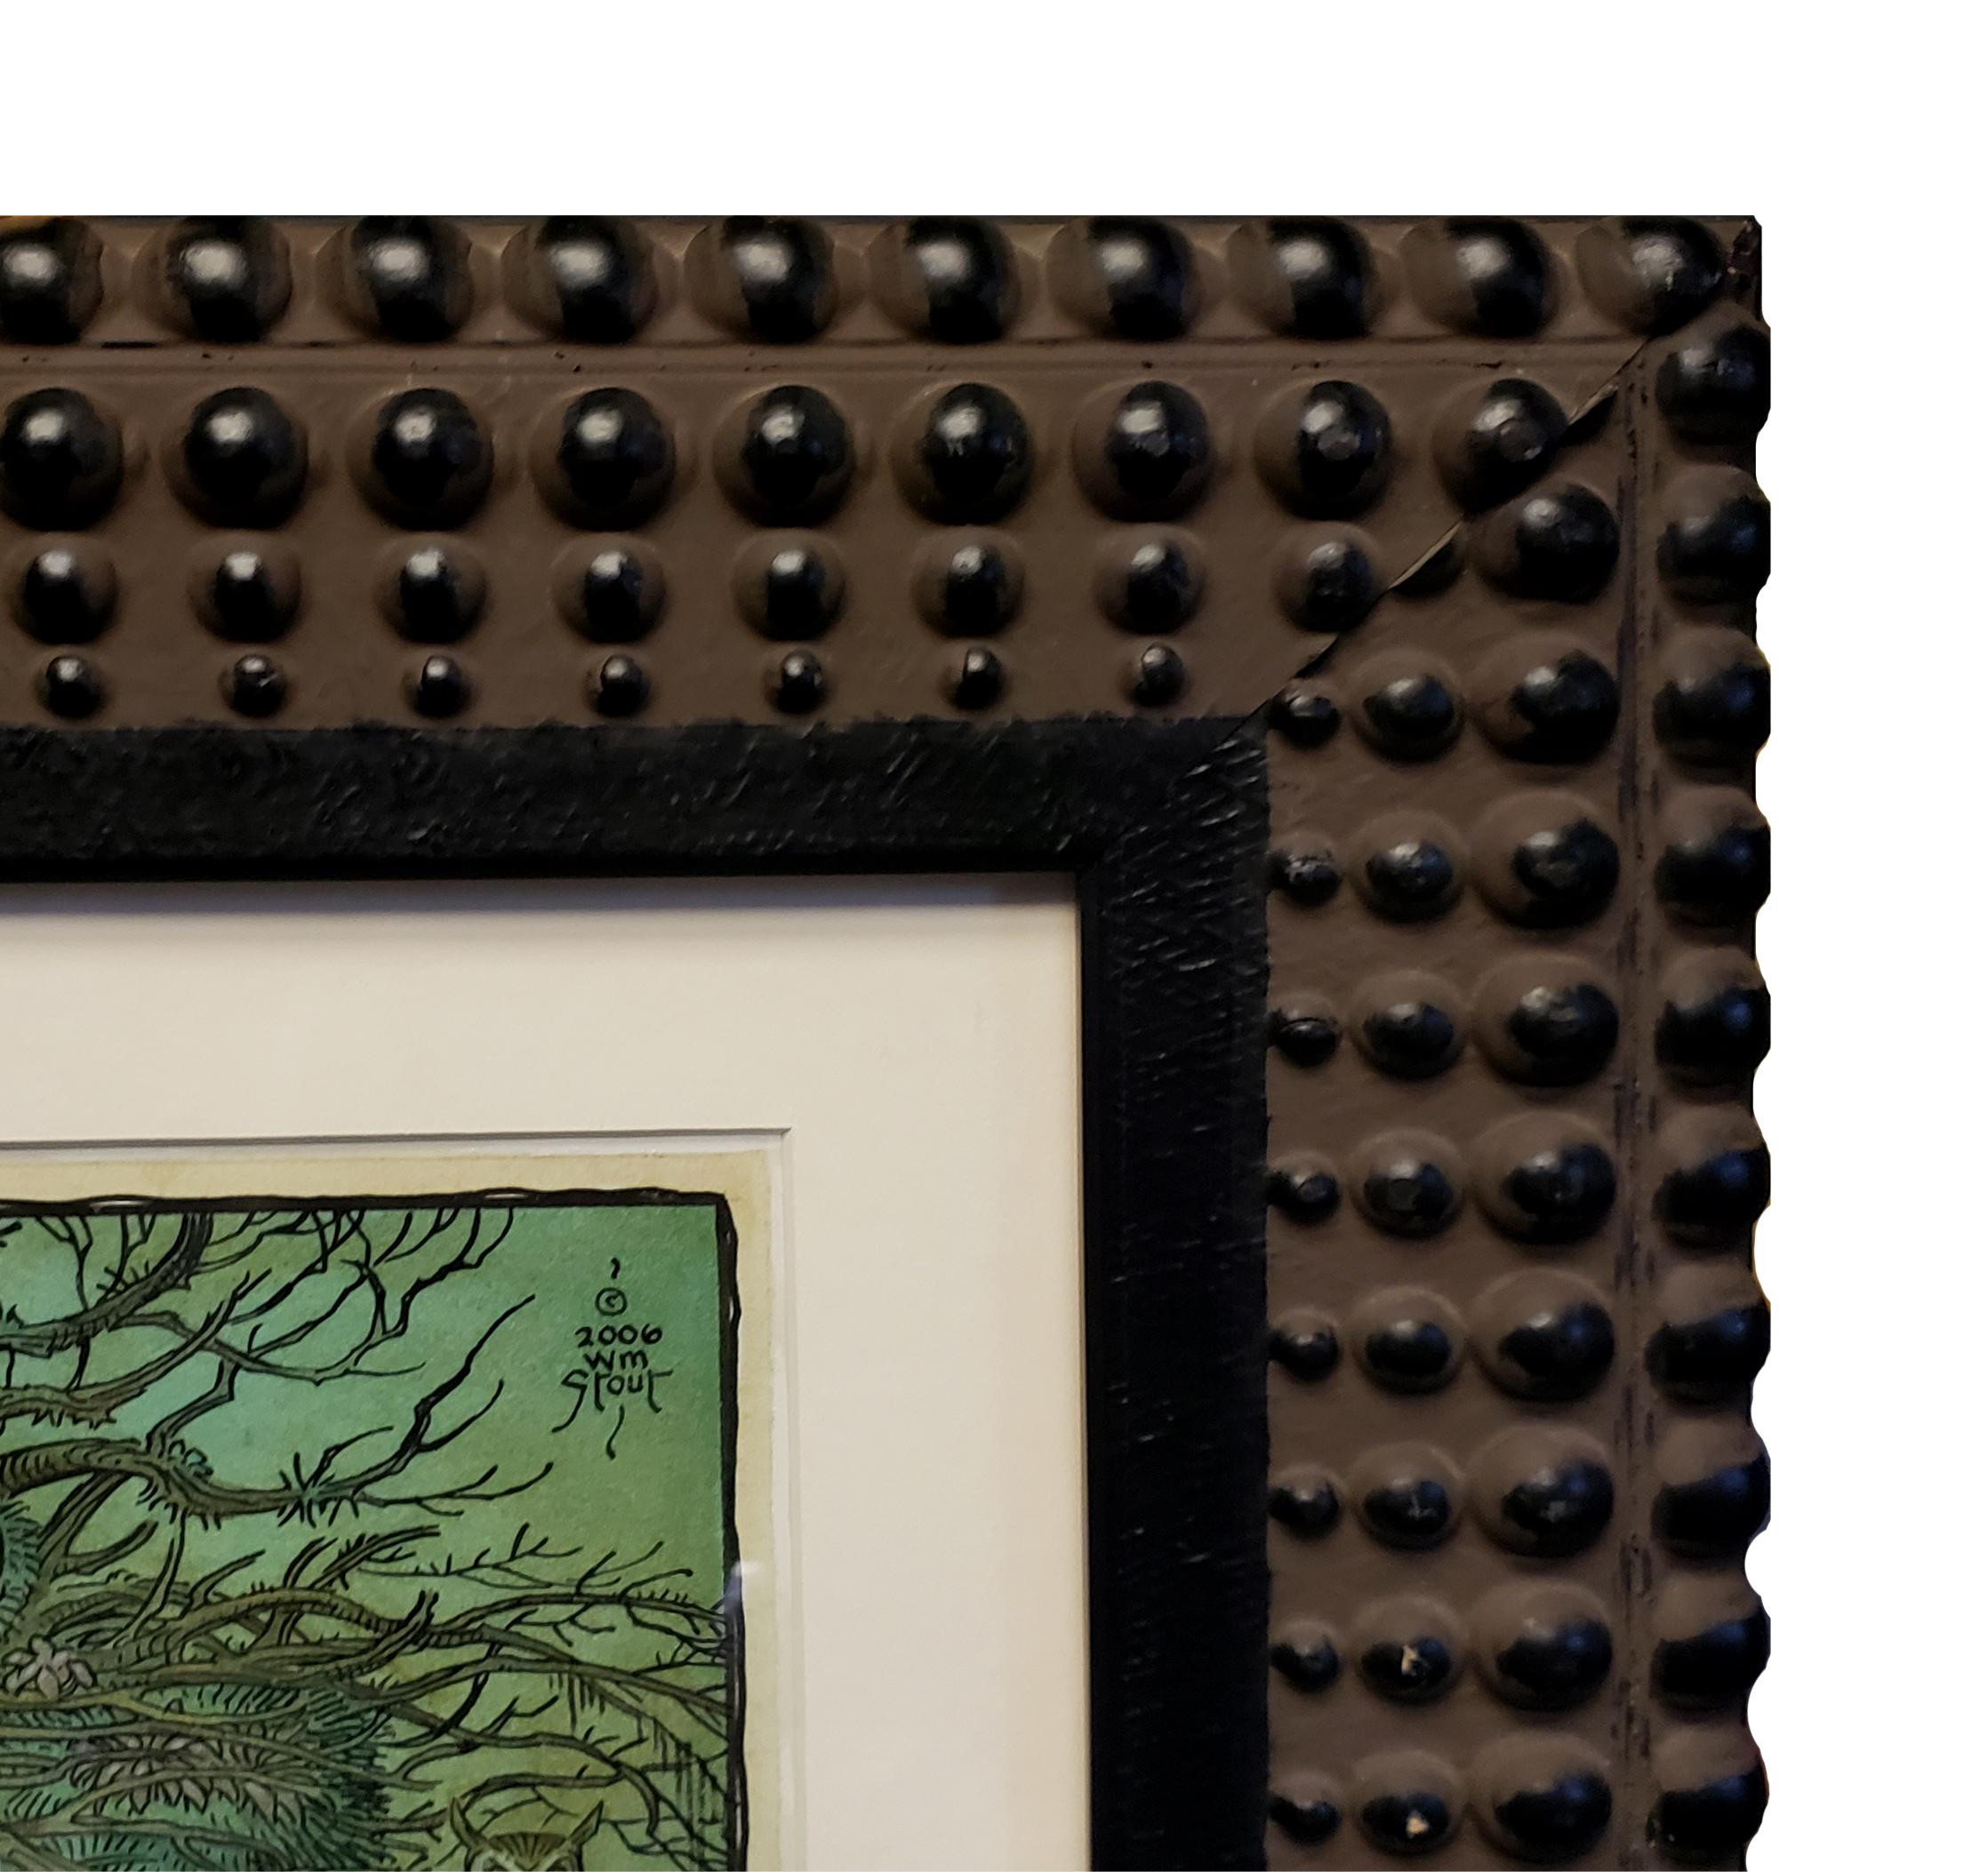 Provenance
Acquired by American Legacy Fine Arts directly from the artist

Exhibited
The Imaginary, Carnegie Art Museum, Oxnard, California, March 10 – May 19, 2019

Framed 22.875